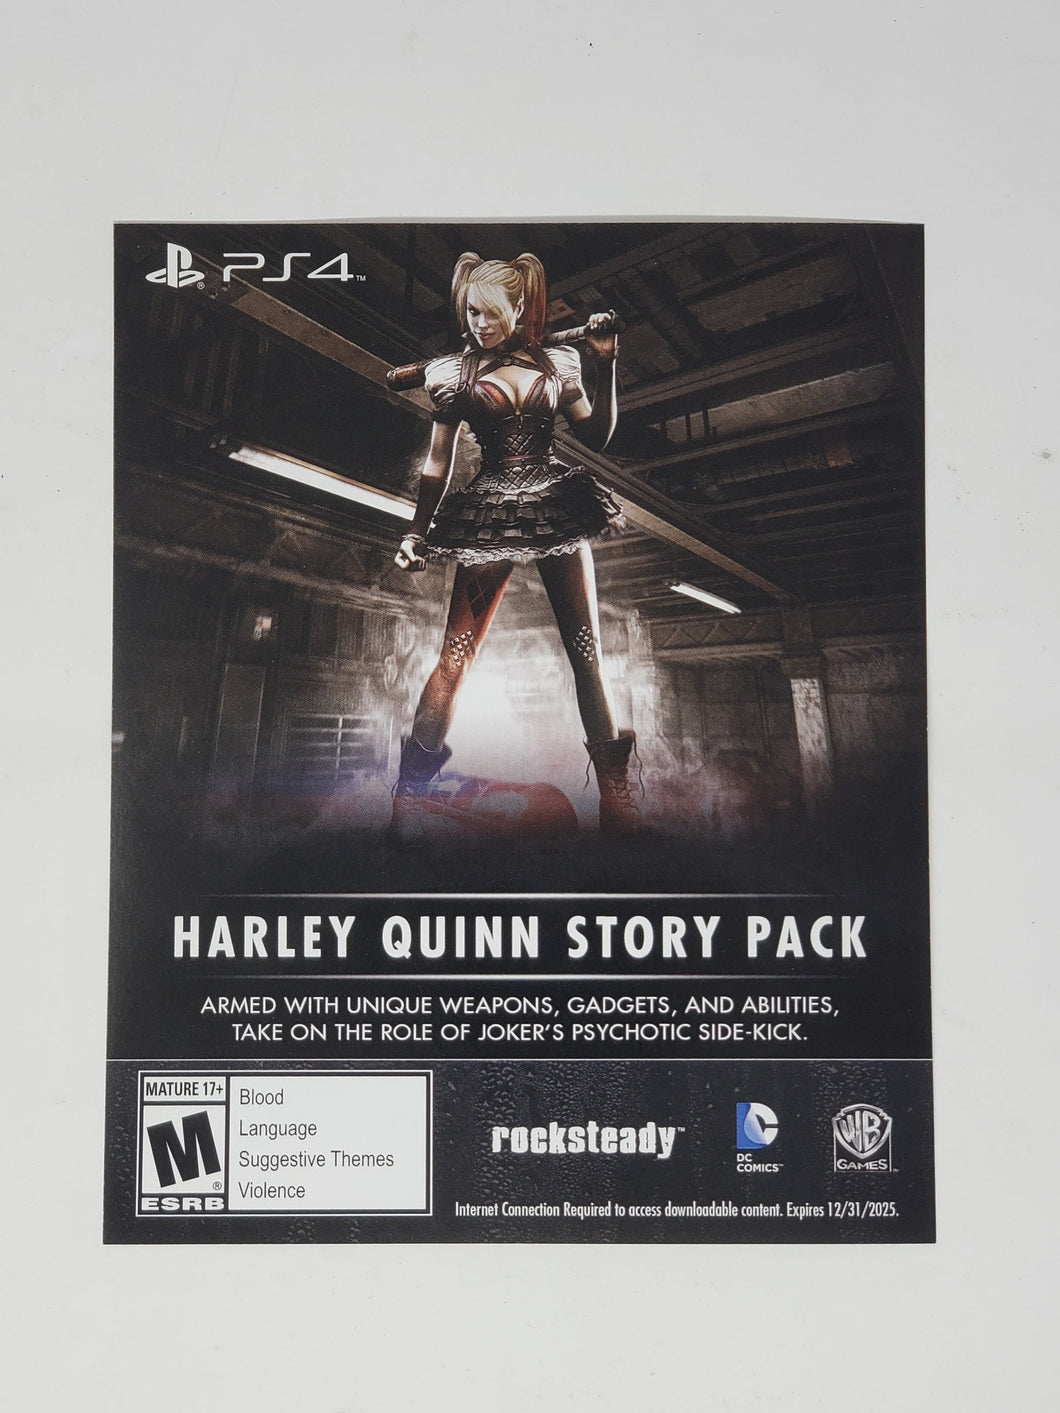 Harley Quinn Story Pack [Insert] - Sony Playstation 4 | PS4